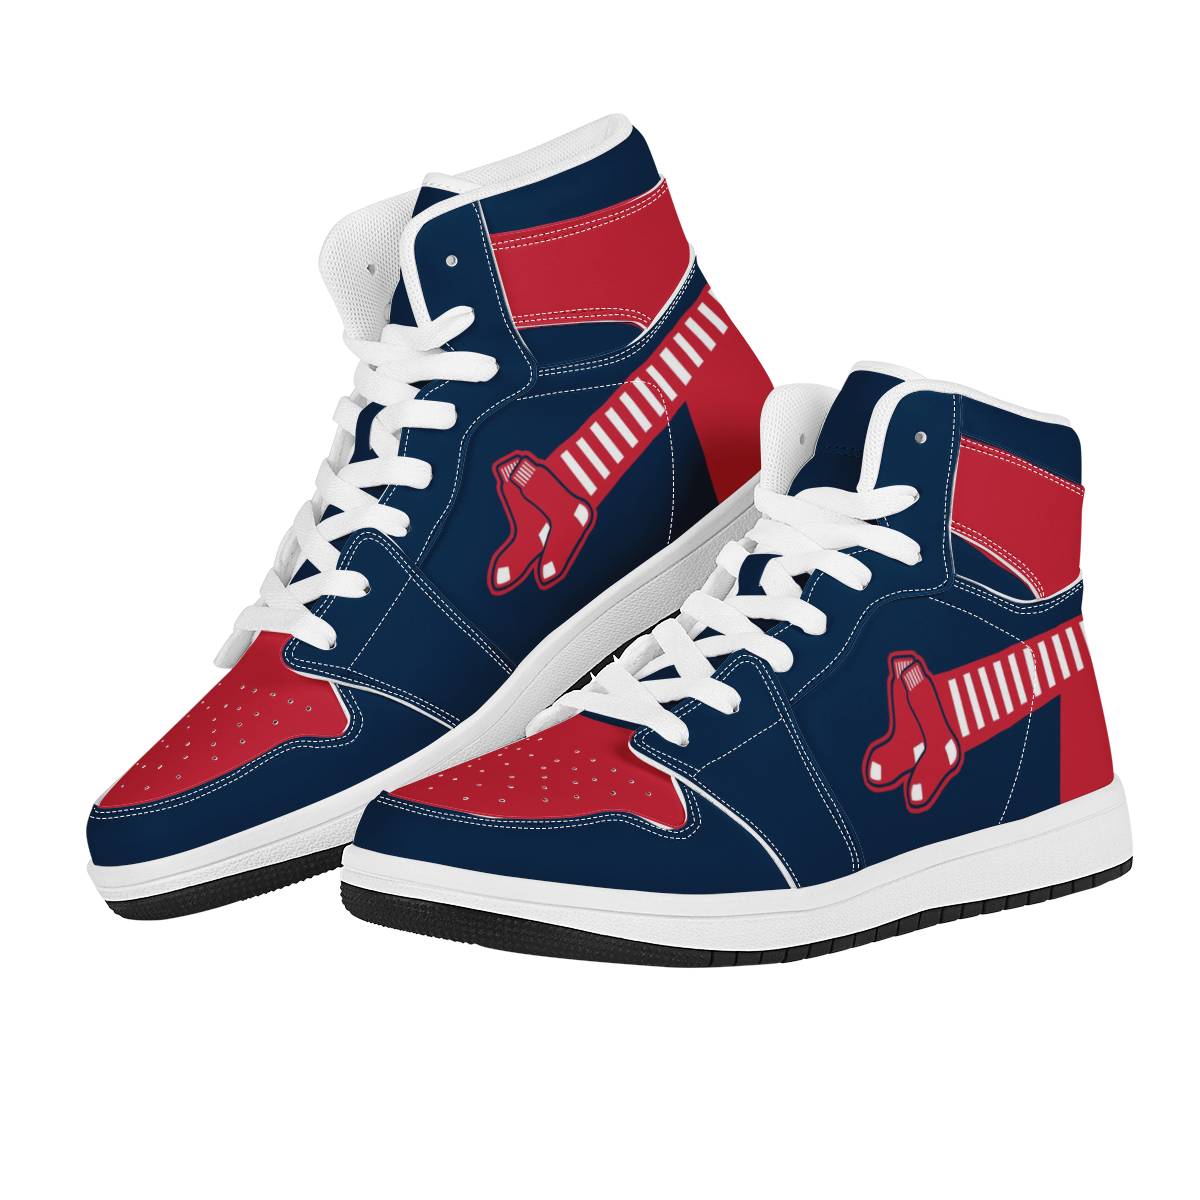 Women's Boston Red Sox High Top Leather AJ1 Sneakers 001